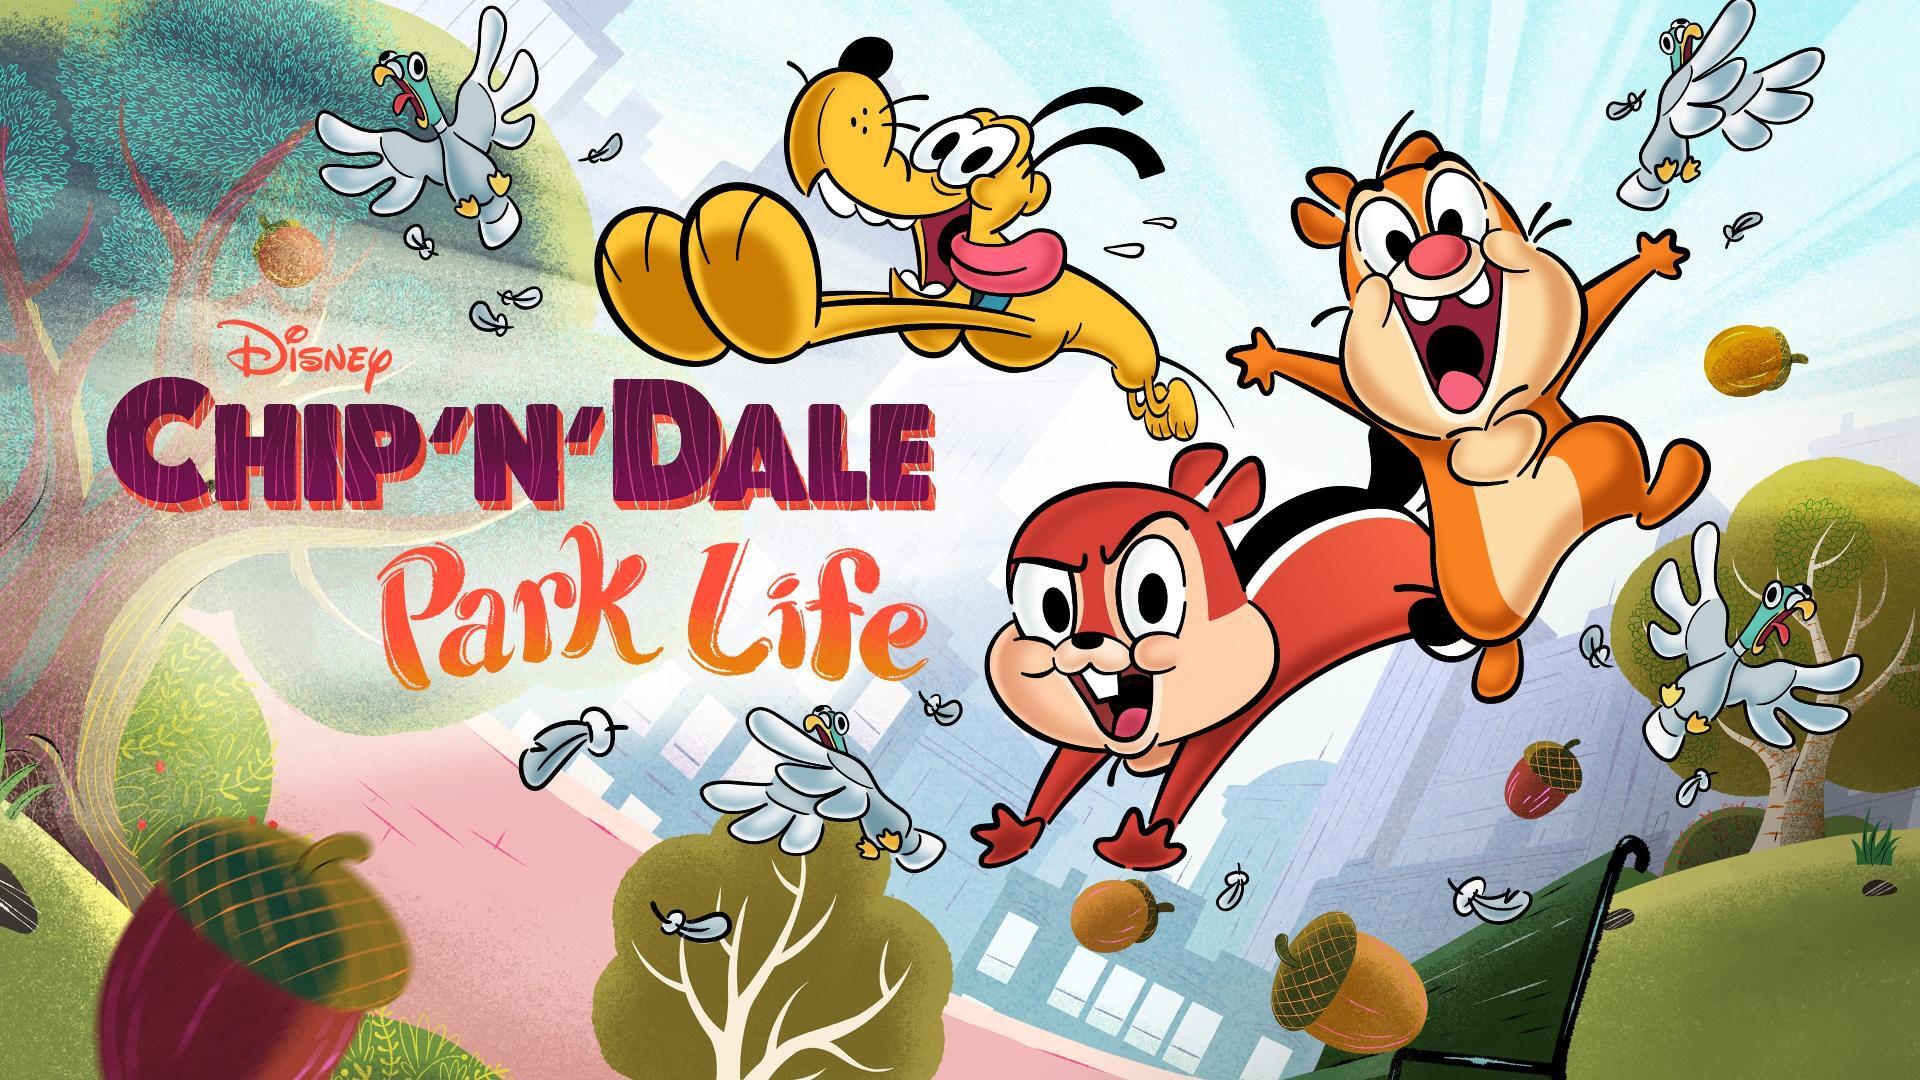 Chip 'N' Dale: Park Life / Чип и Дейл